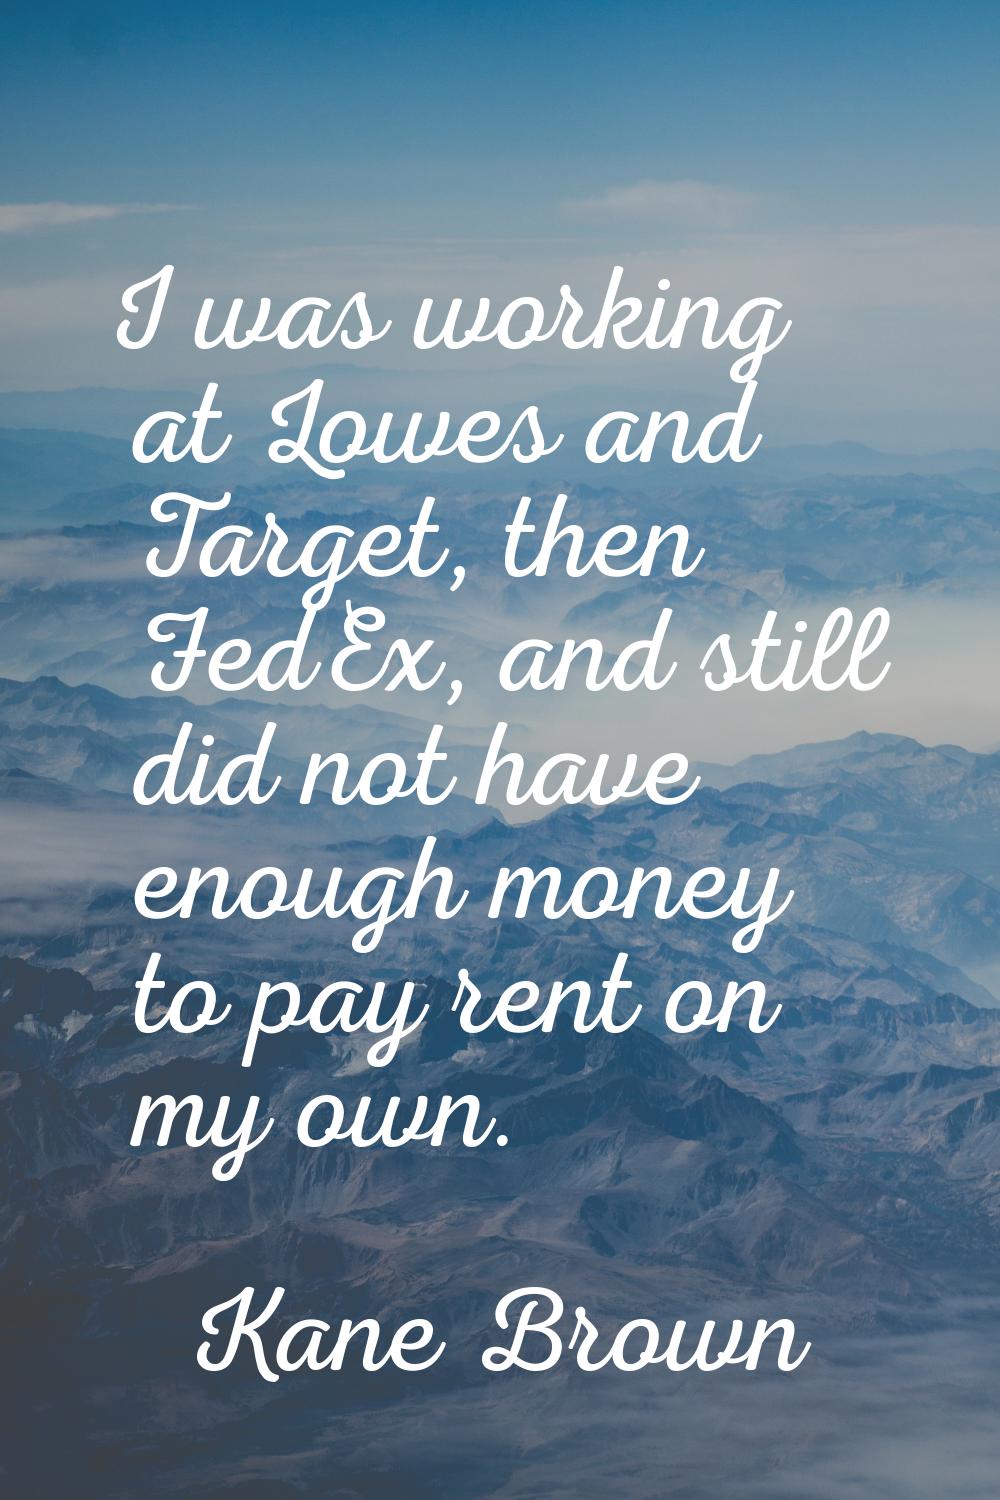 I was working at Lowes and Target, then FedEx, and still did not have enough money to pay rent on m